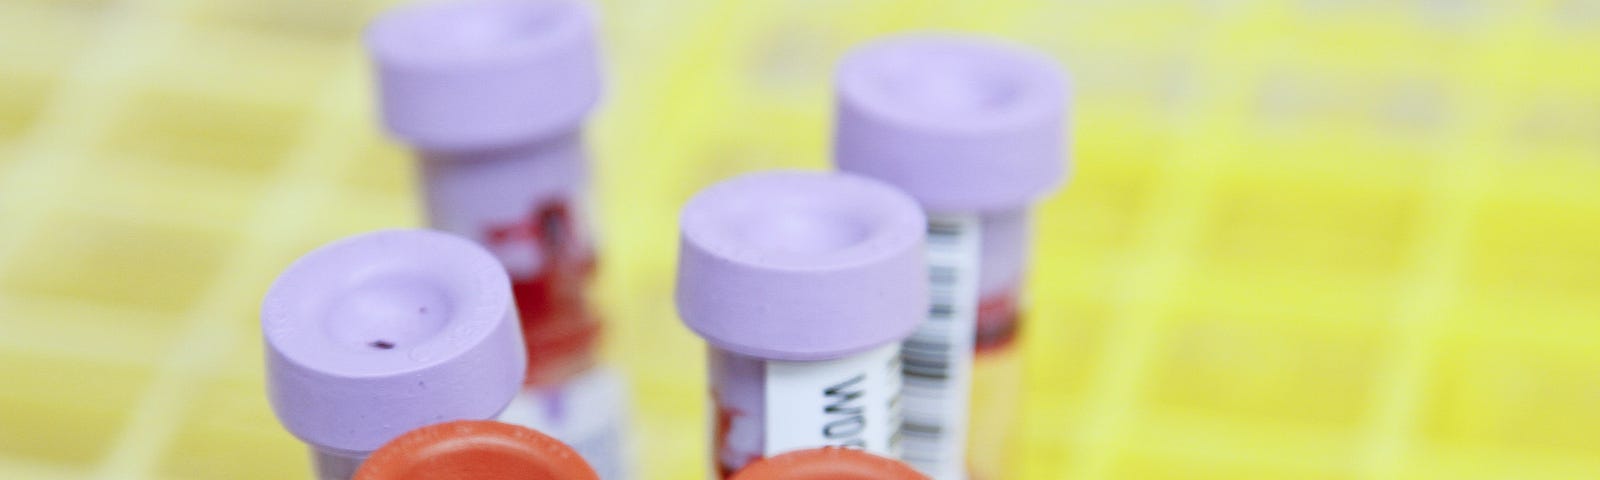 Blood test tubes with barcode labels and brightly coloured caps.